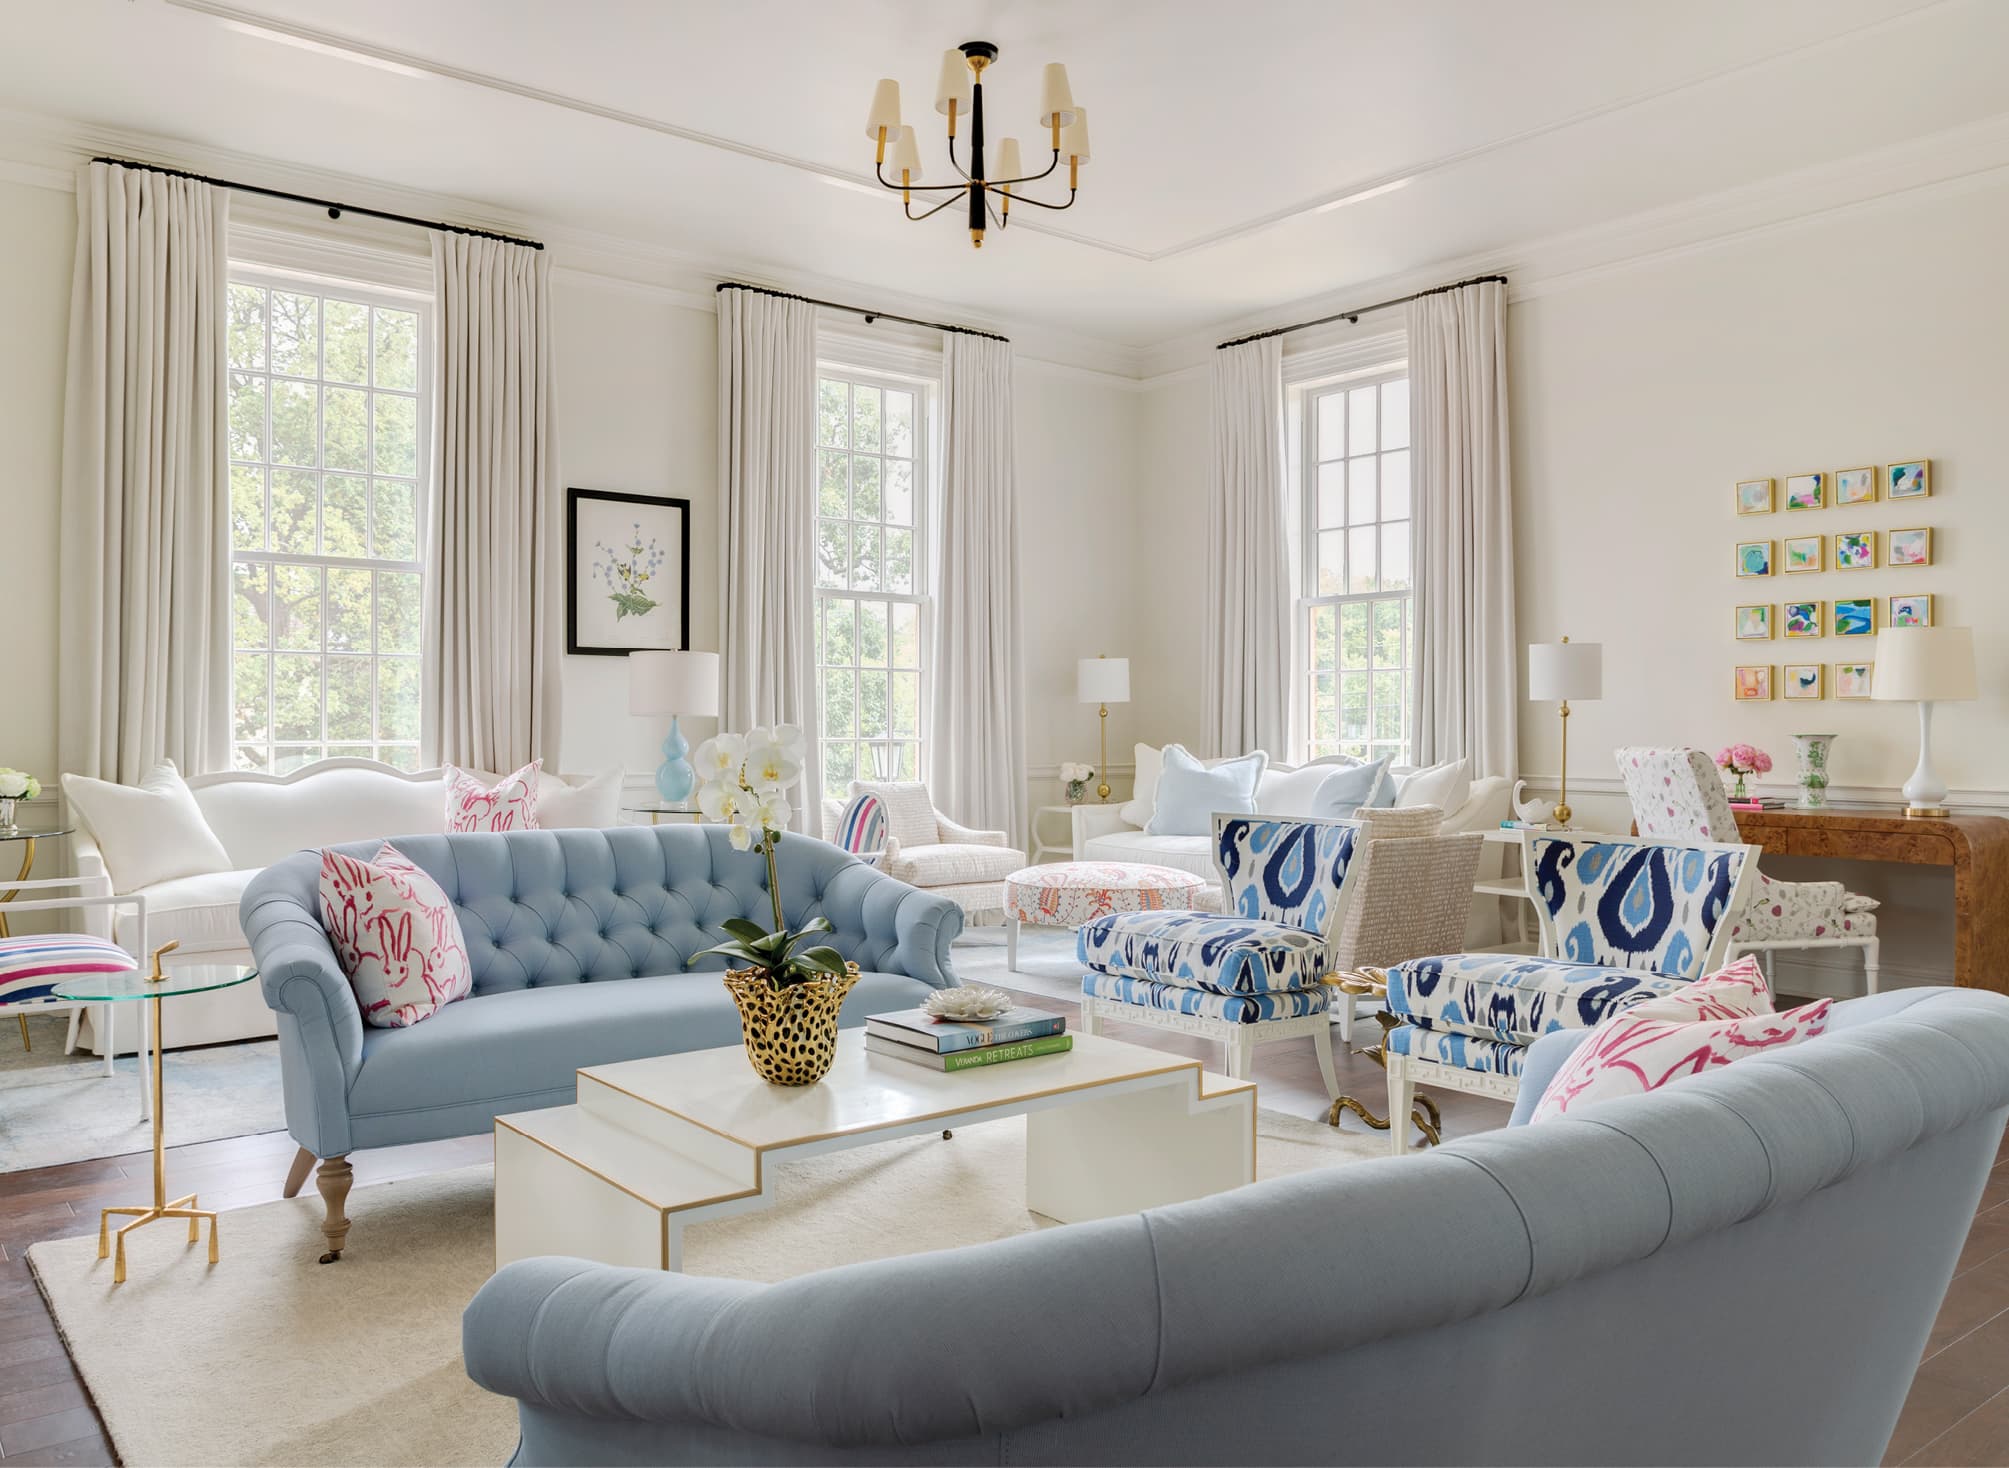 Sitting area with white walls, large windows and light blue furniture